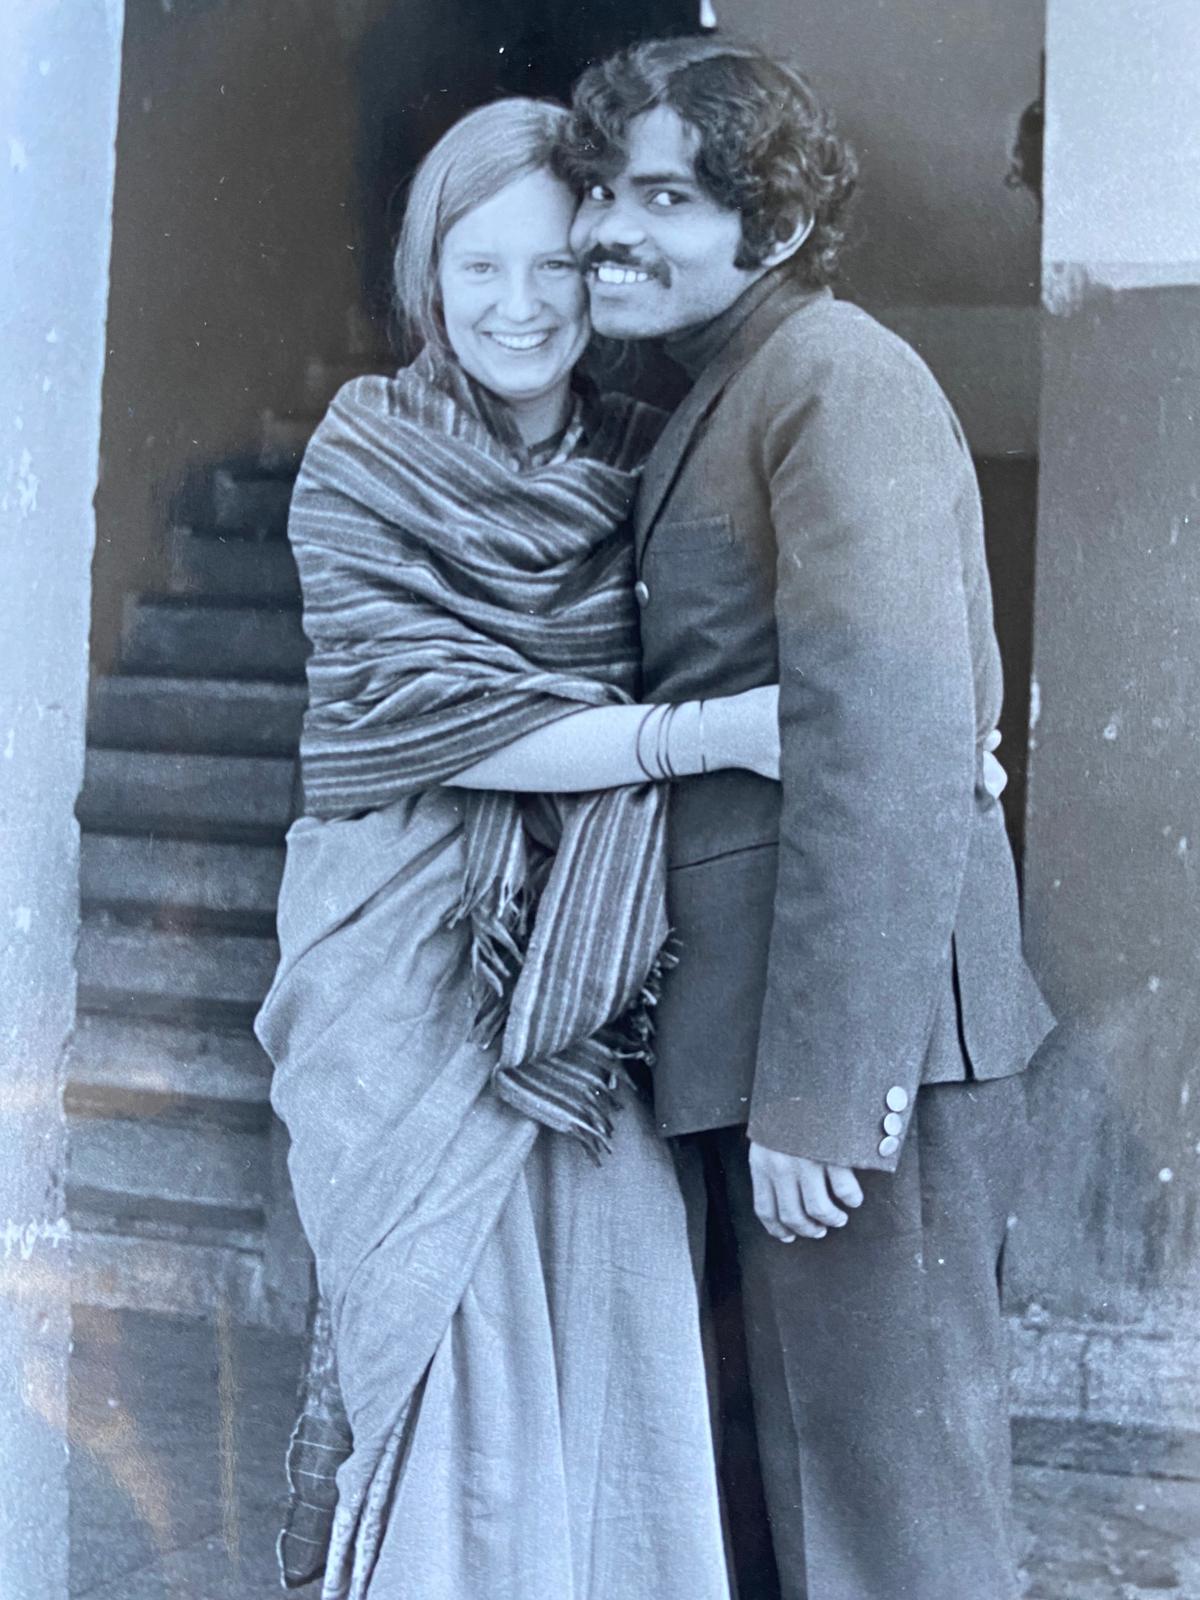 The couple met for the first time in the Indian capital city of New Delhi on Dec. 17, 1975. (Courtesy of Dr. P.K. Mahanandia)